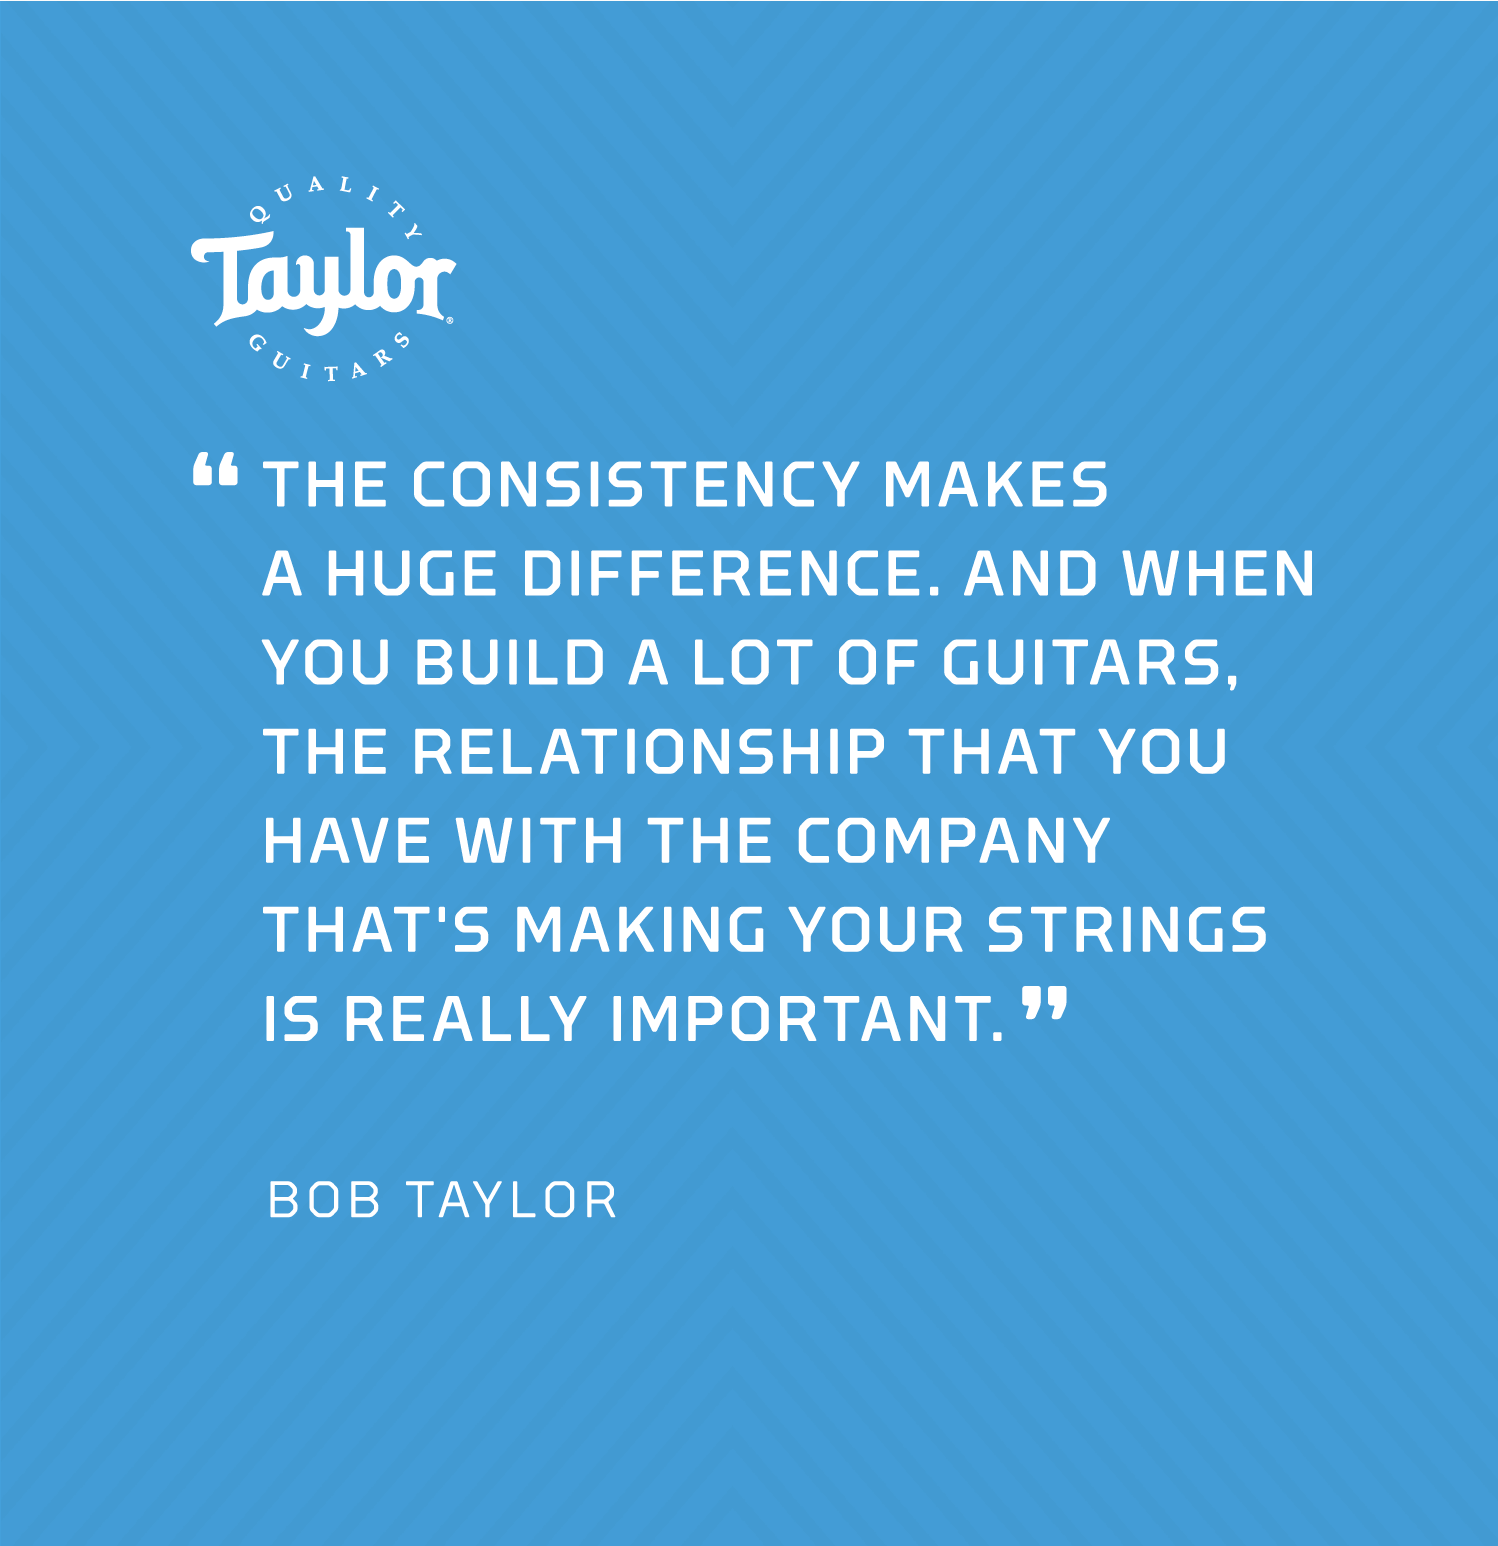 "The consistency makes a huge difference. And when you build a lot of guitars, the relationship that you have with the company that's making your strings is really important." - Bob Taylor